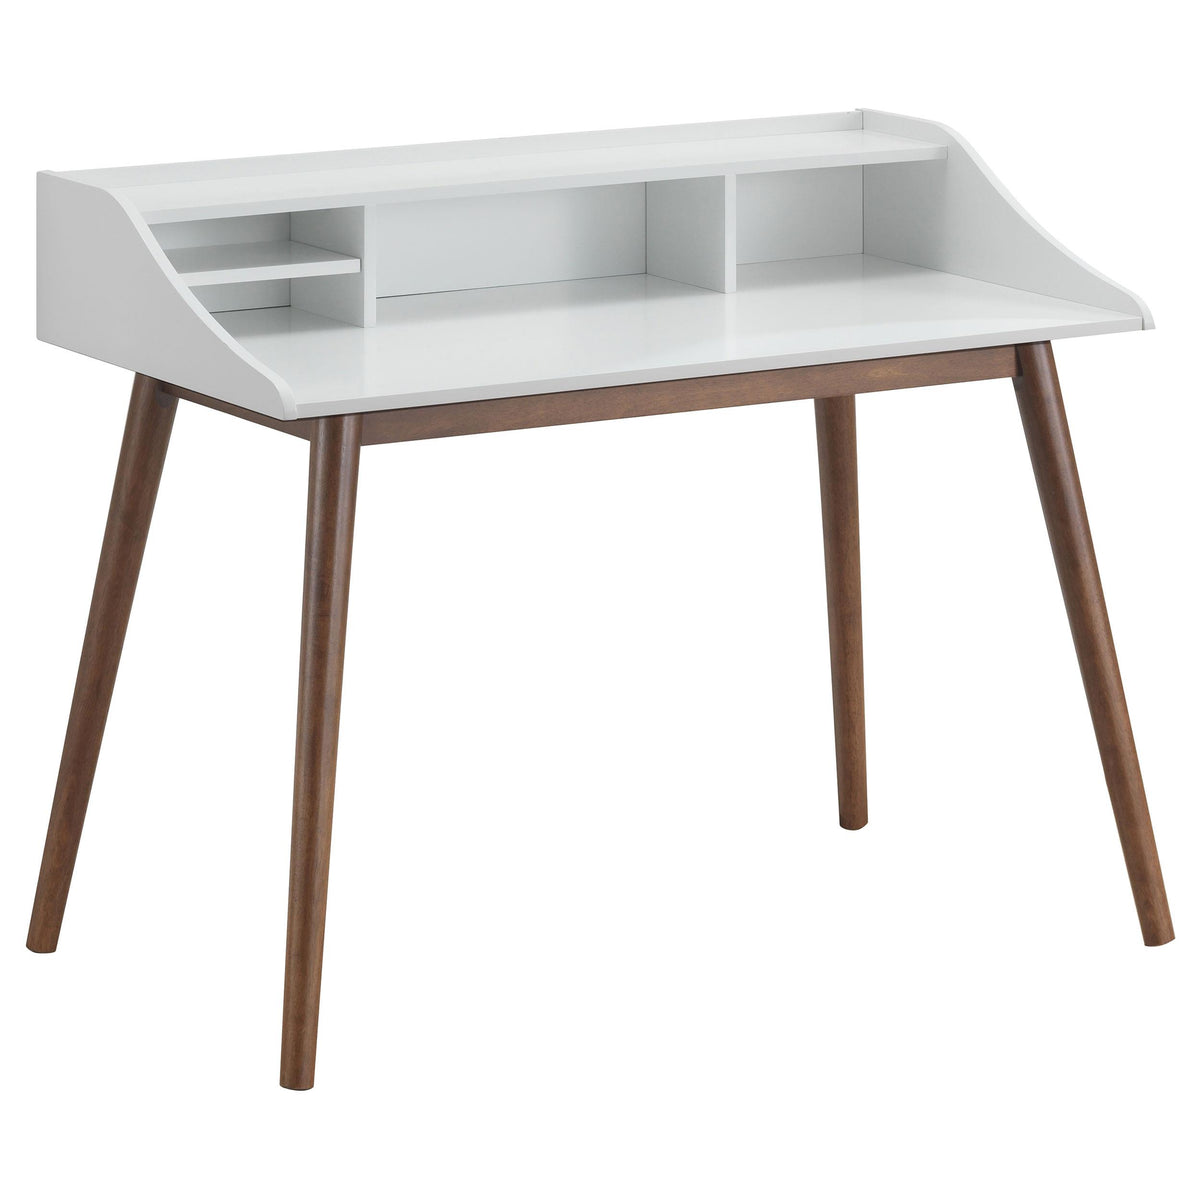 Percy 4-Compartment Writing Desk White and Walnut Percy 4-Compartment Writing Desk White and Walnut Half Price Furniture